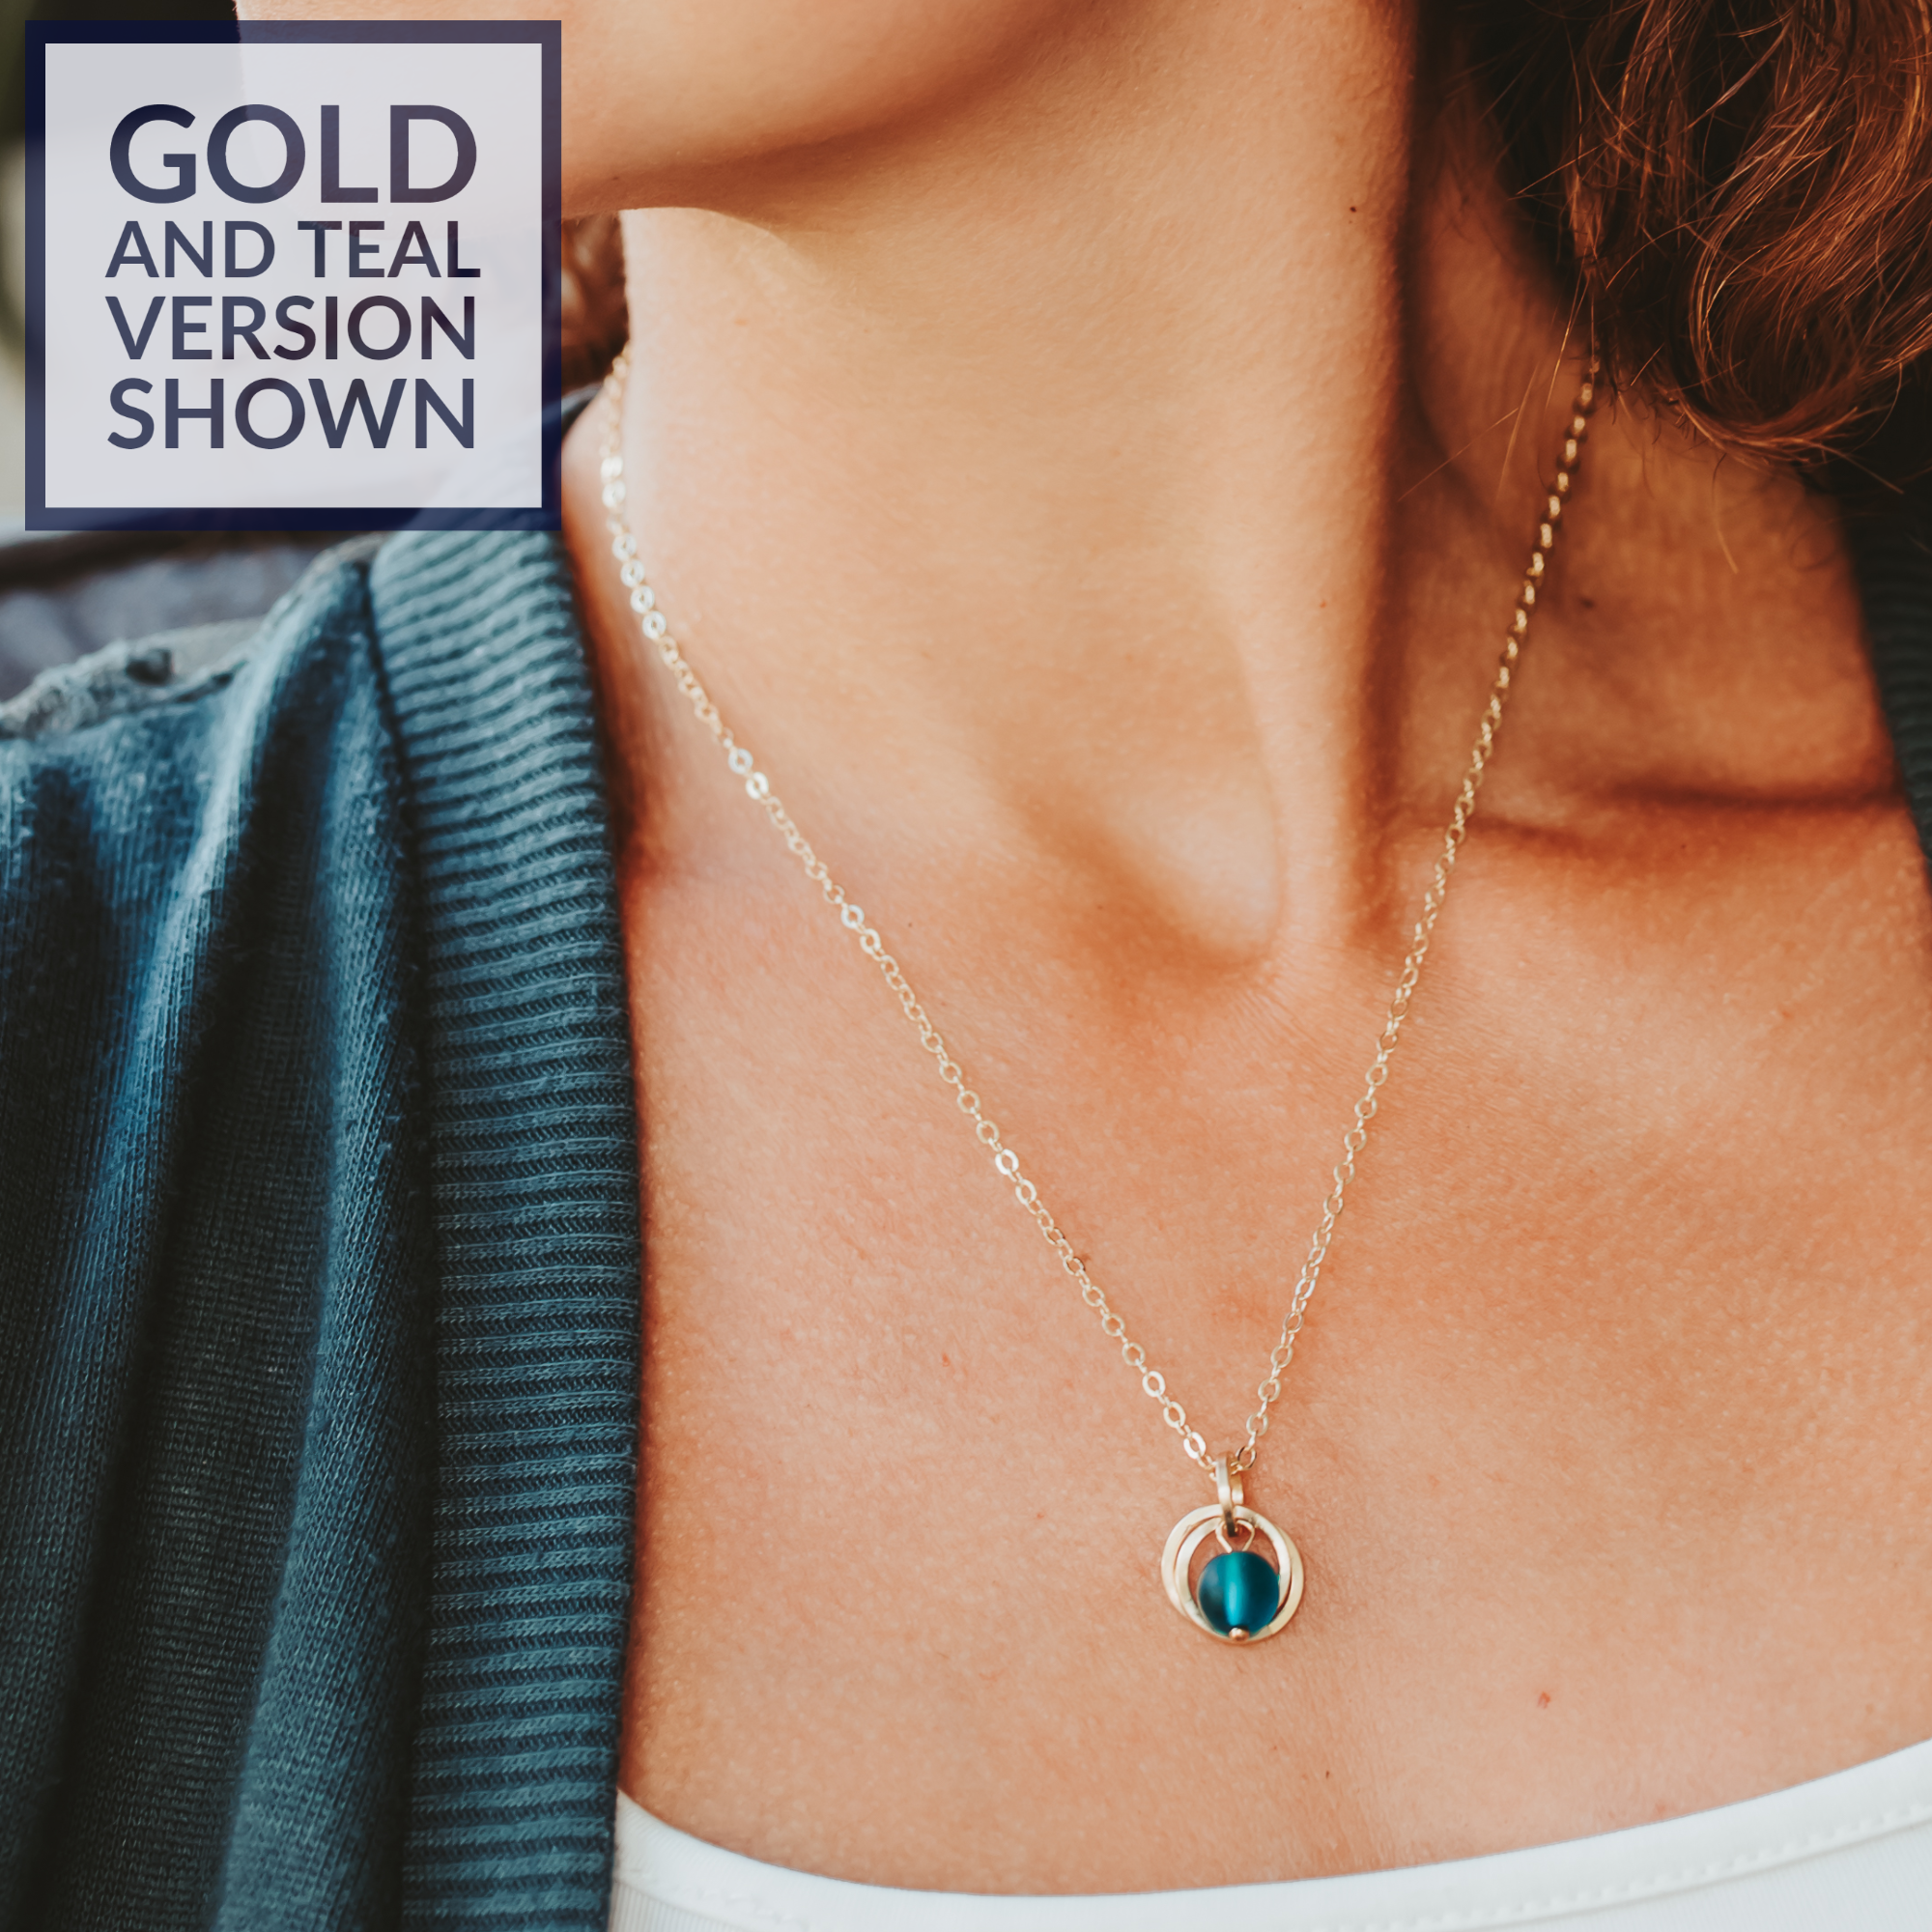 Light Baby Blue Round Recycled Glass Ball Simple Pendant Necklace in 14K Yellow Gold Fill